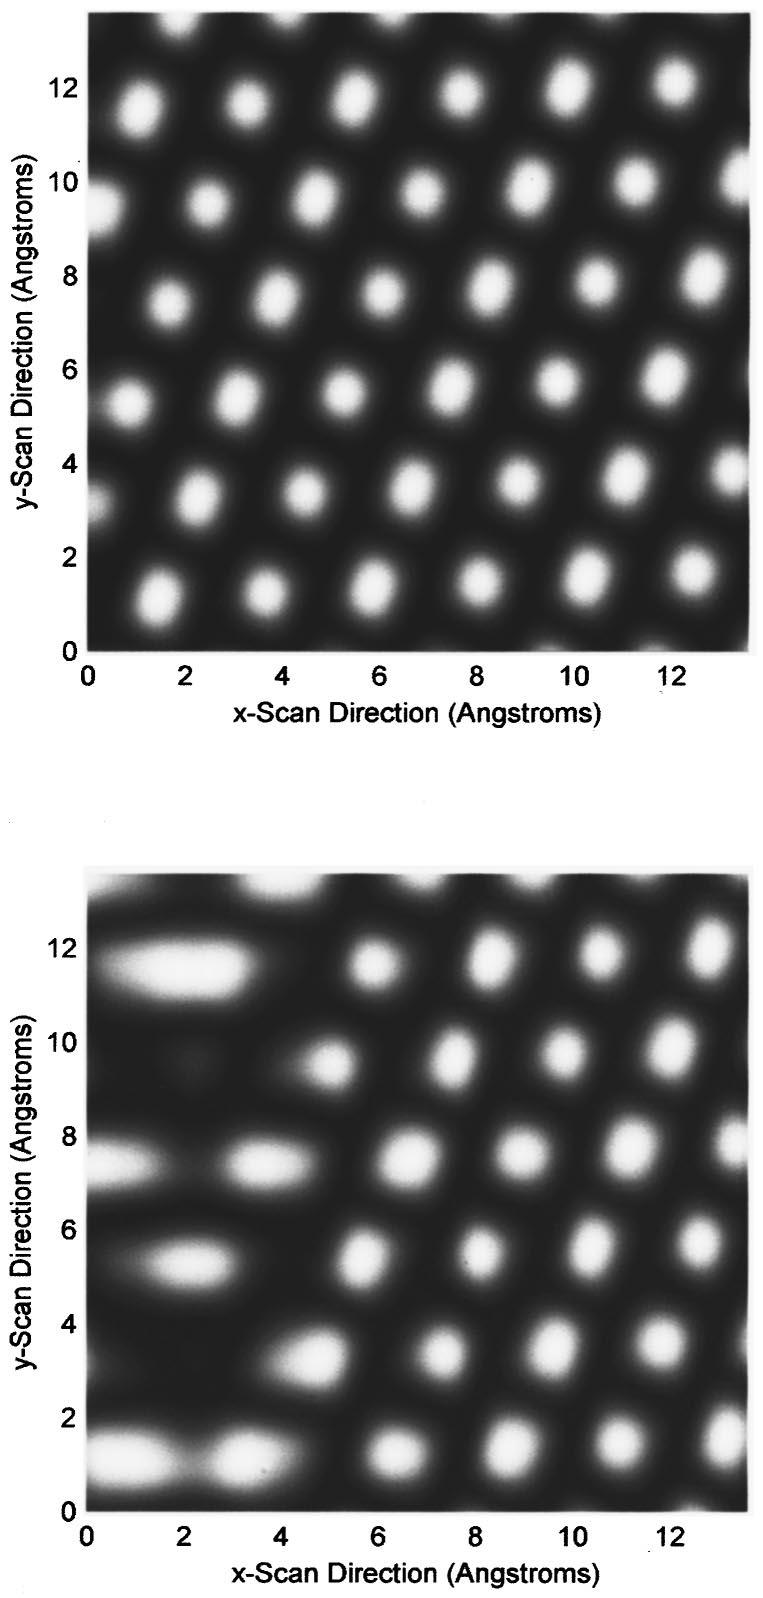 Rev. Sci. Instrum., Vol. 70, No. 12, December 1999 Vibration compensation 4603 FIG. 3. Simulated scan paths and images.